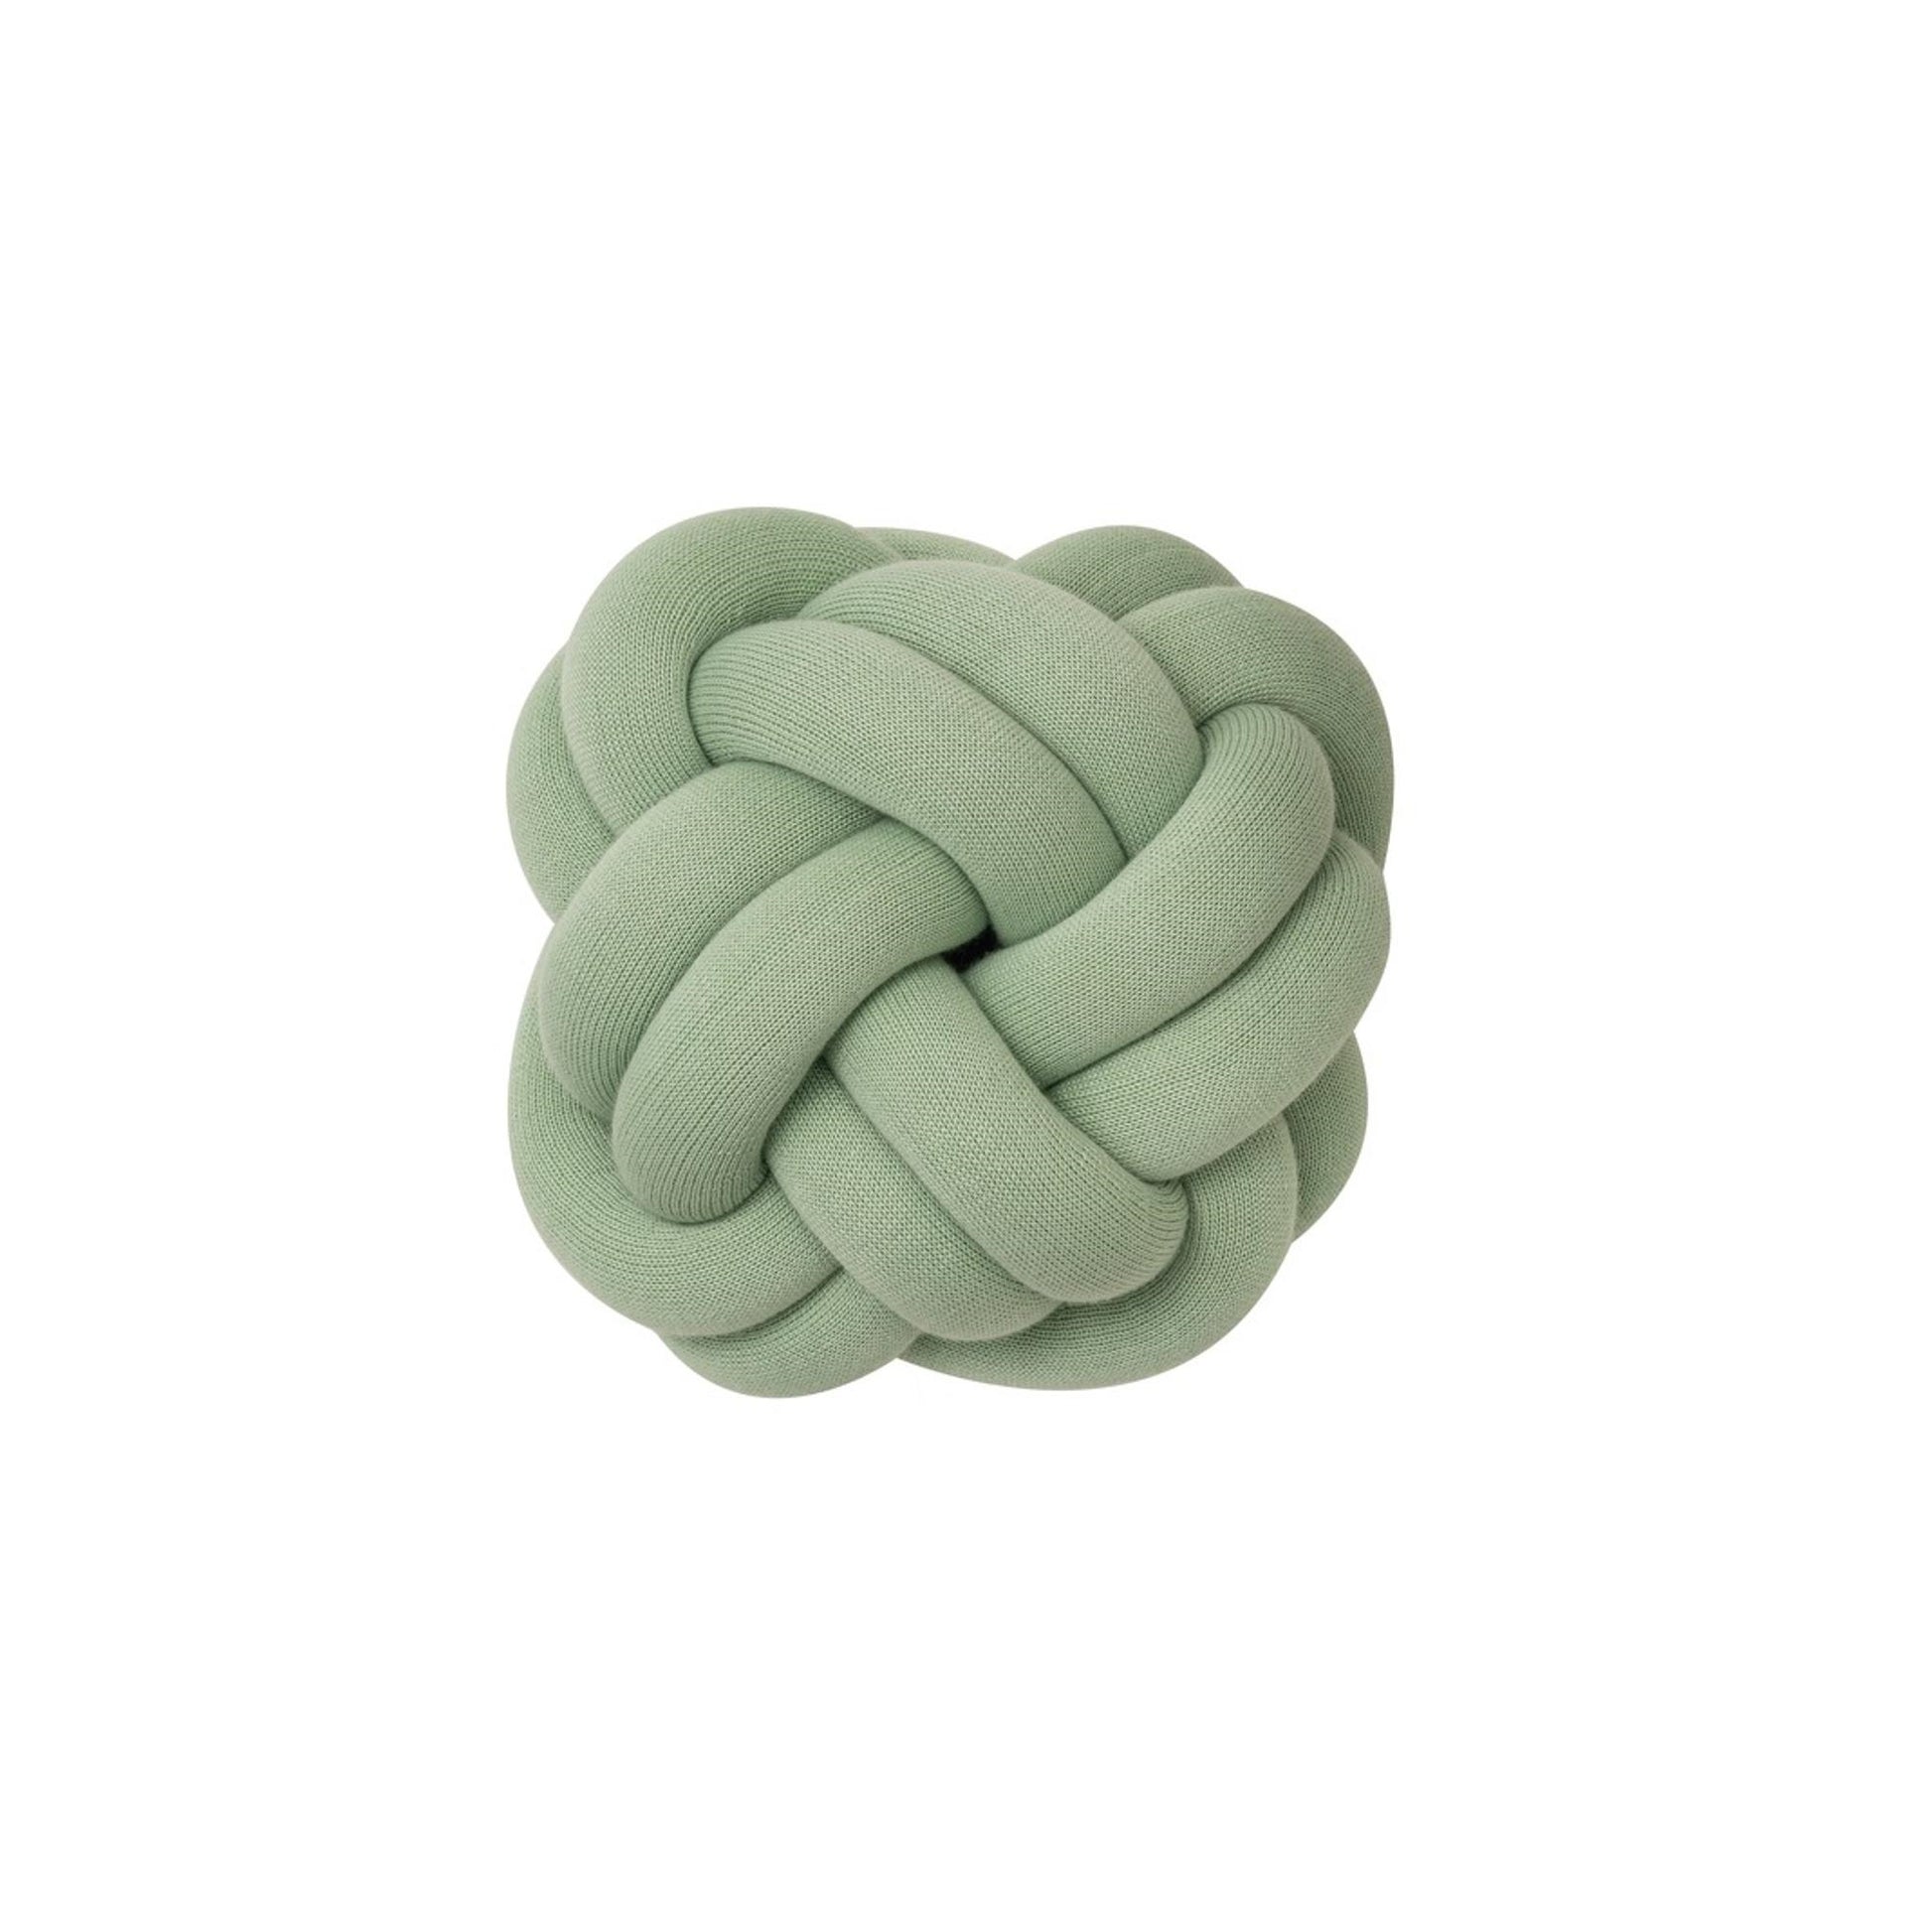 Knot Cushion by Design House Stockholm #Mint Green